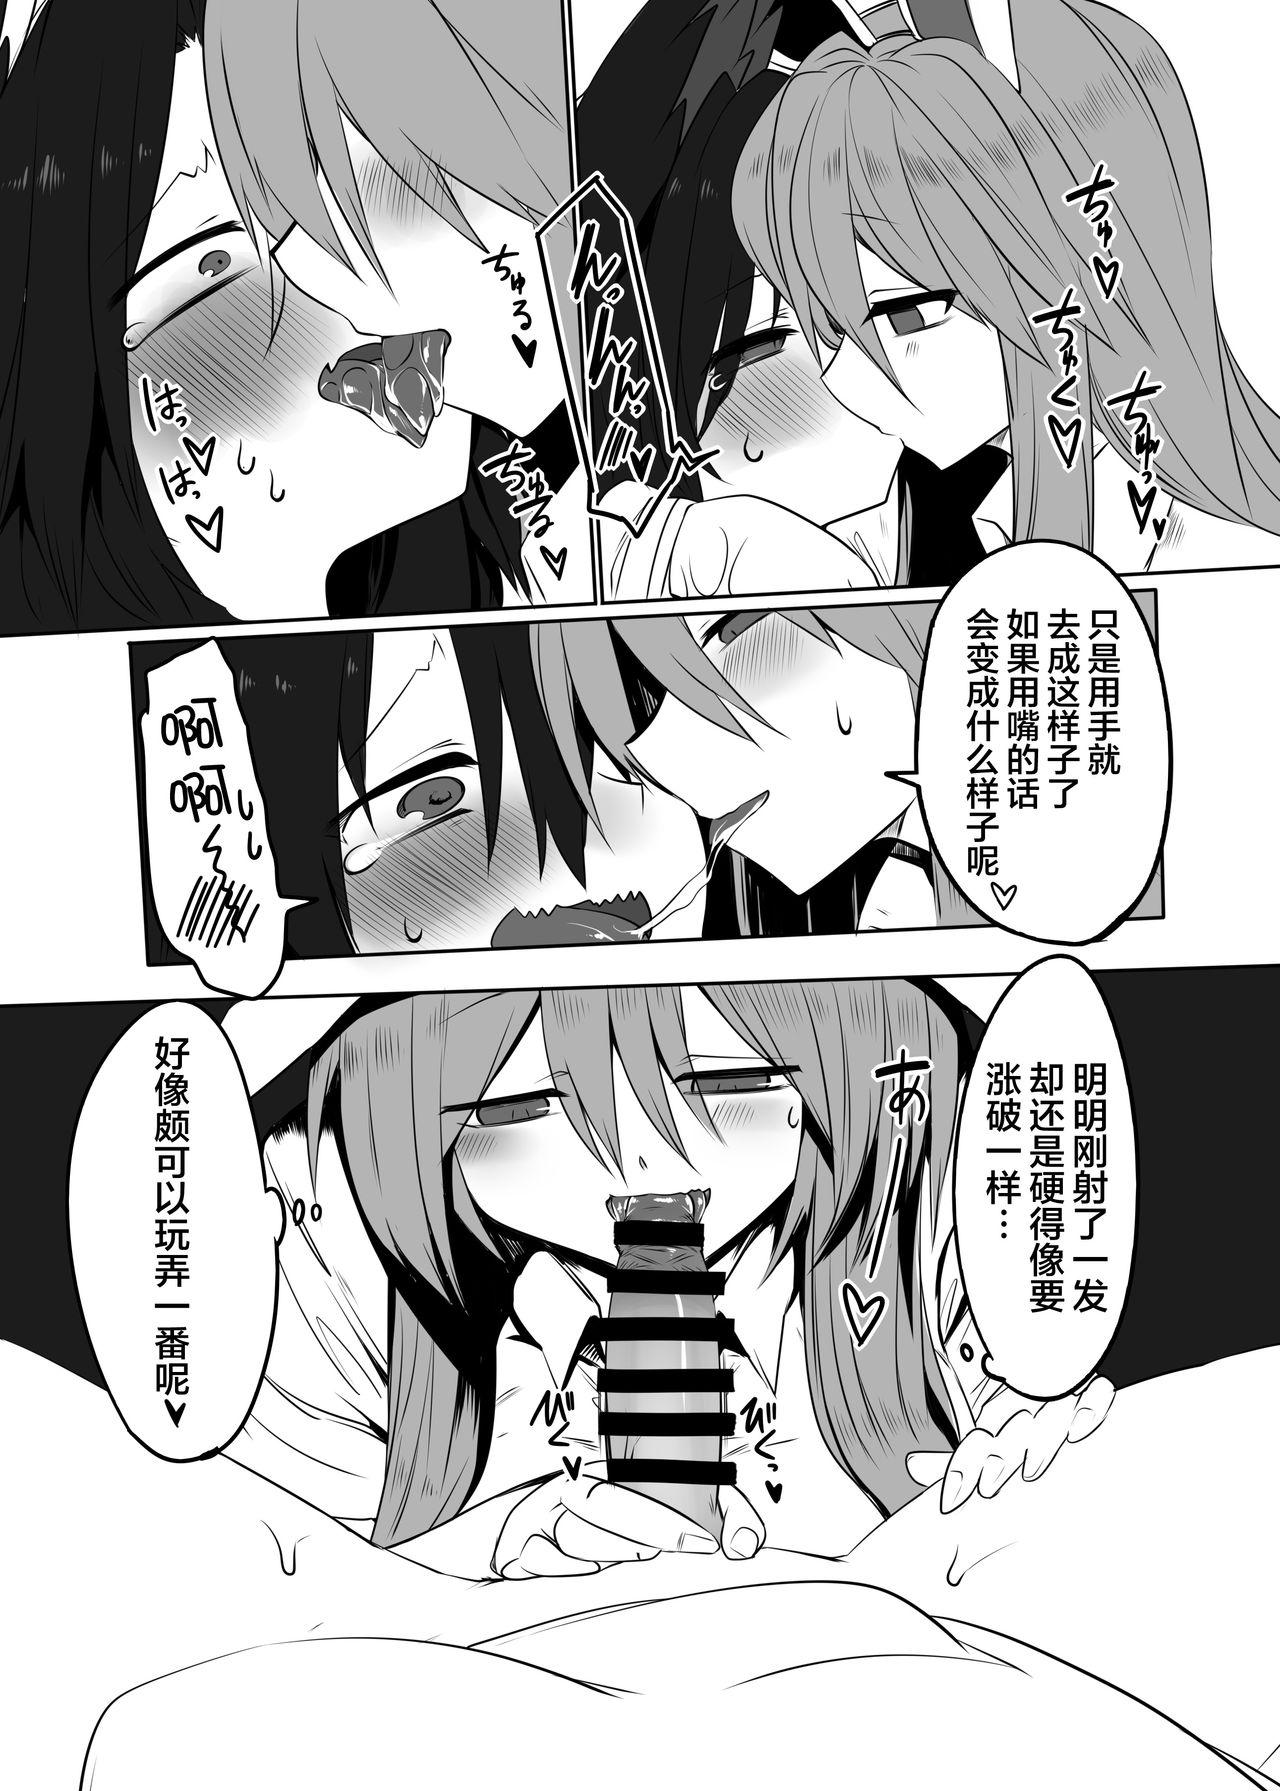 Teensex Kage x Udo - Touhou project Viet Nam - Page 8